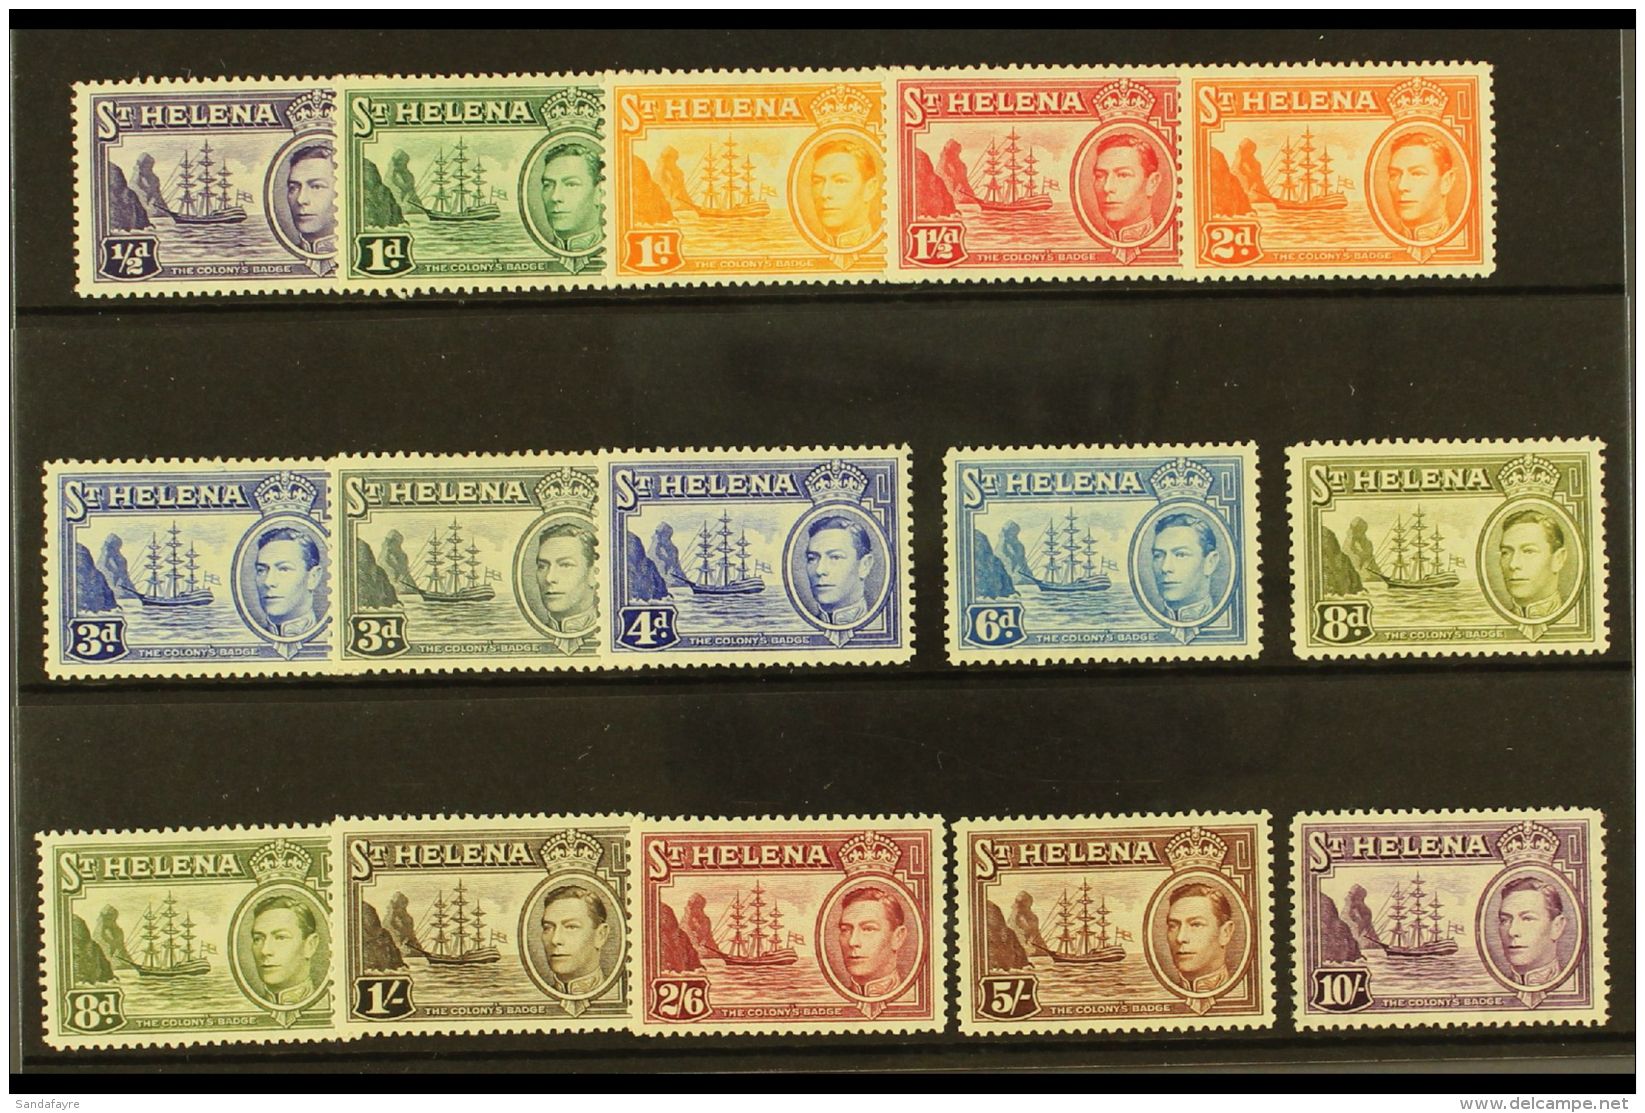 1938-44 Pictorial Definitive Set Plus 8d Listed Shade, SG 131/40, Fine Mint (15 Stamps) For More Images, Please... - Sint-Helena